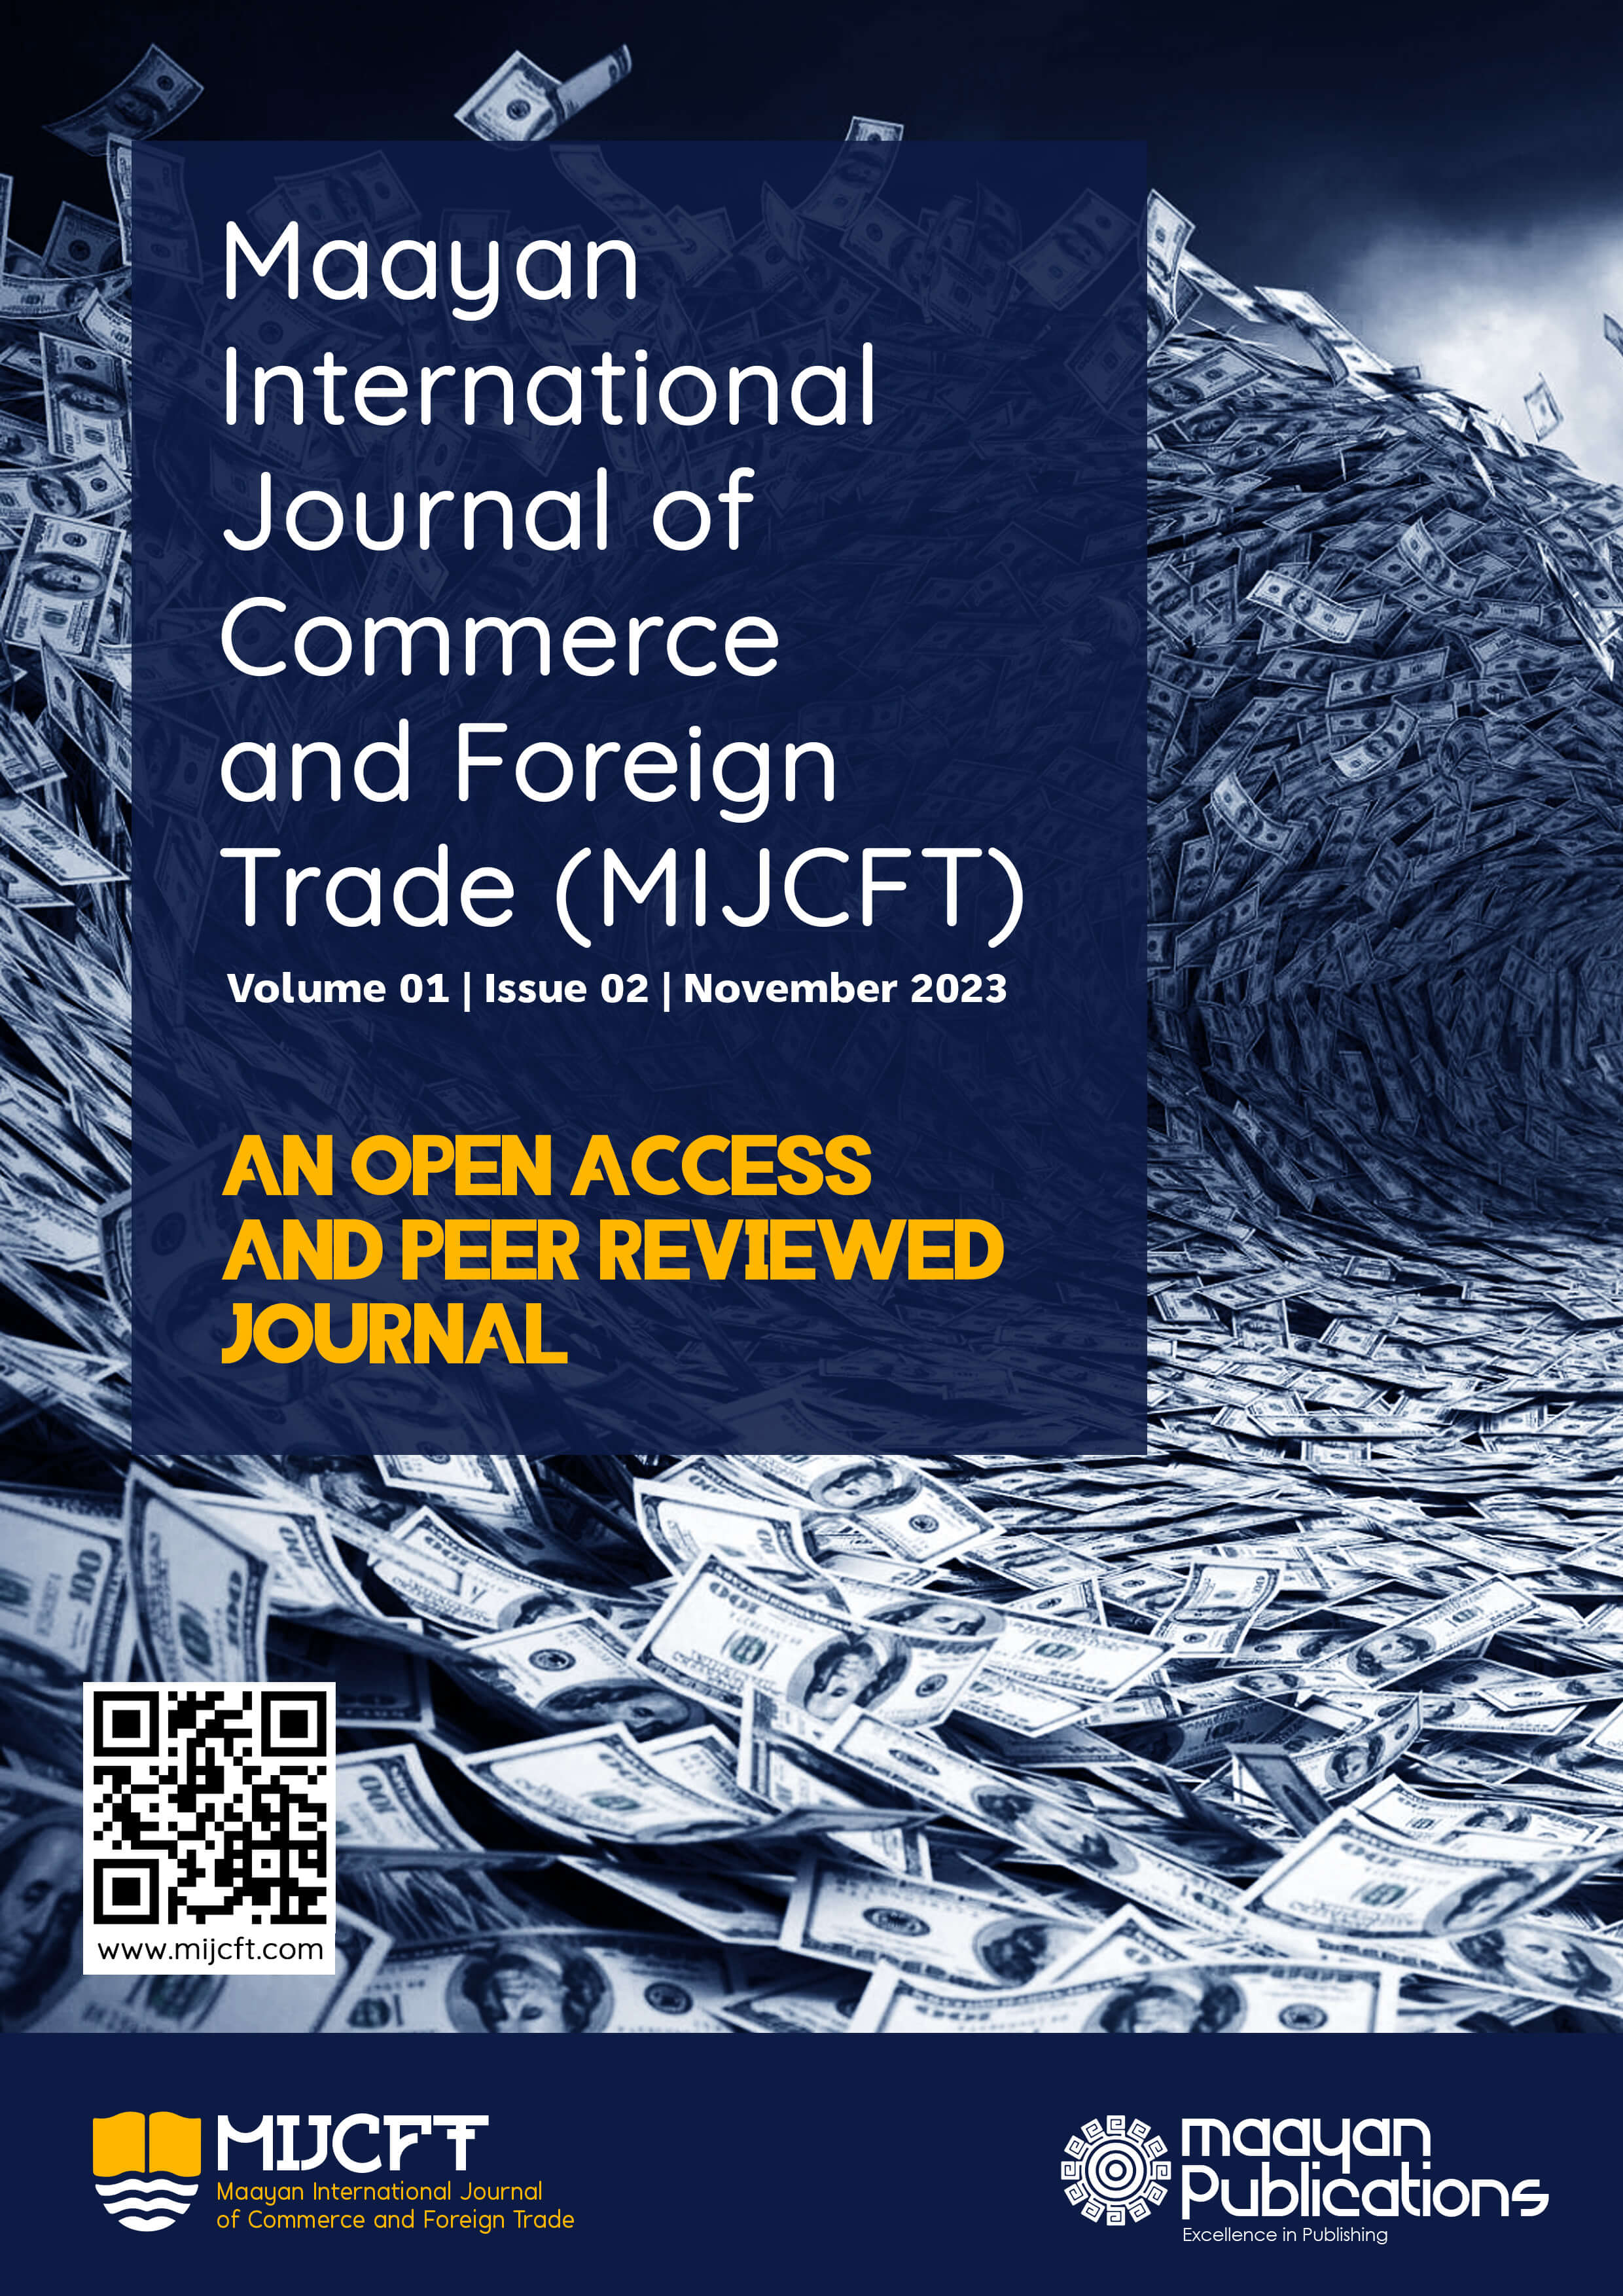 Maayan International Journal of Commerce and Foreign Trade (MIJCFT) | Volume 01 Issue 02 (November 2023)